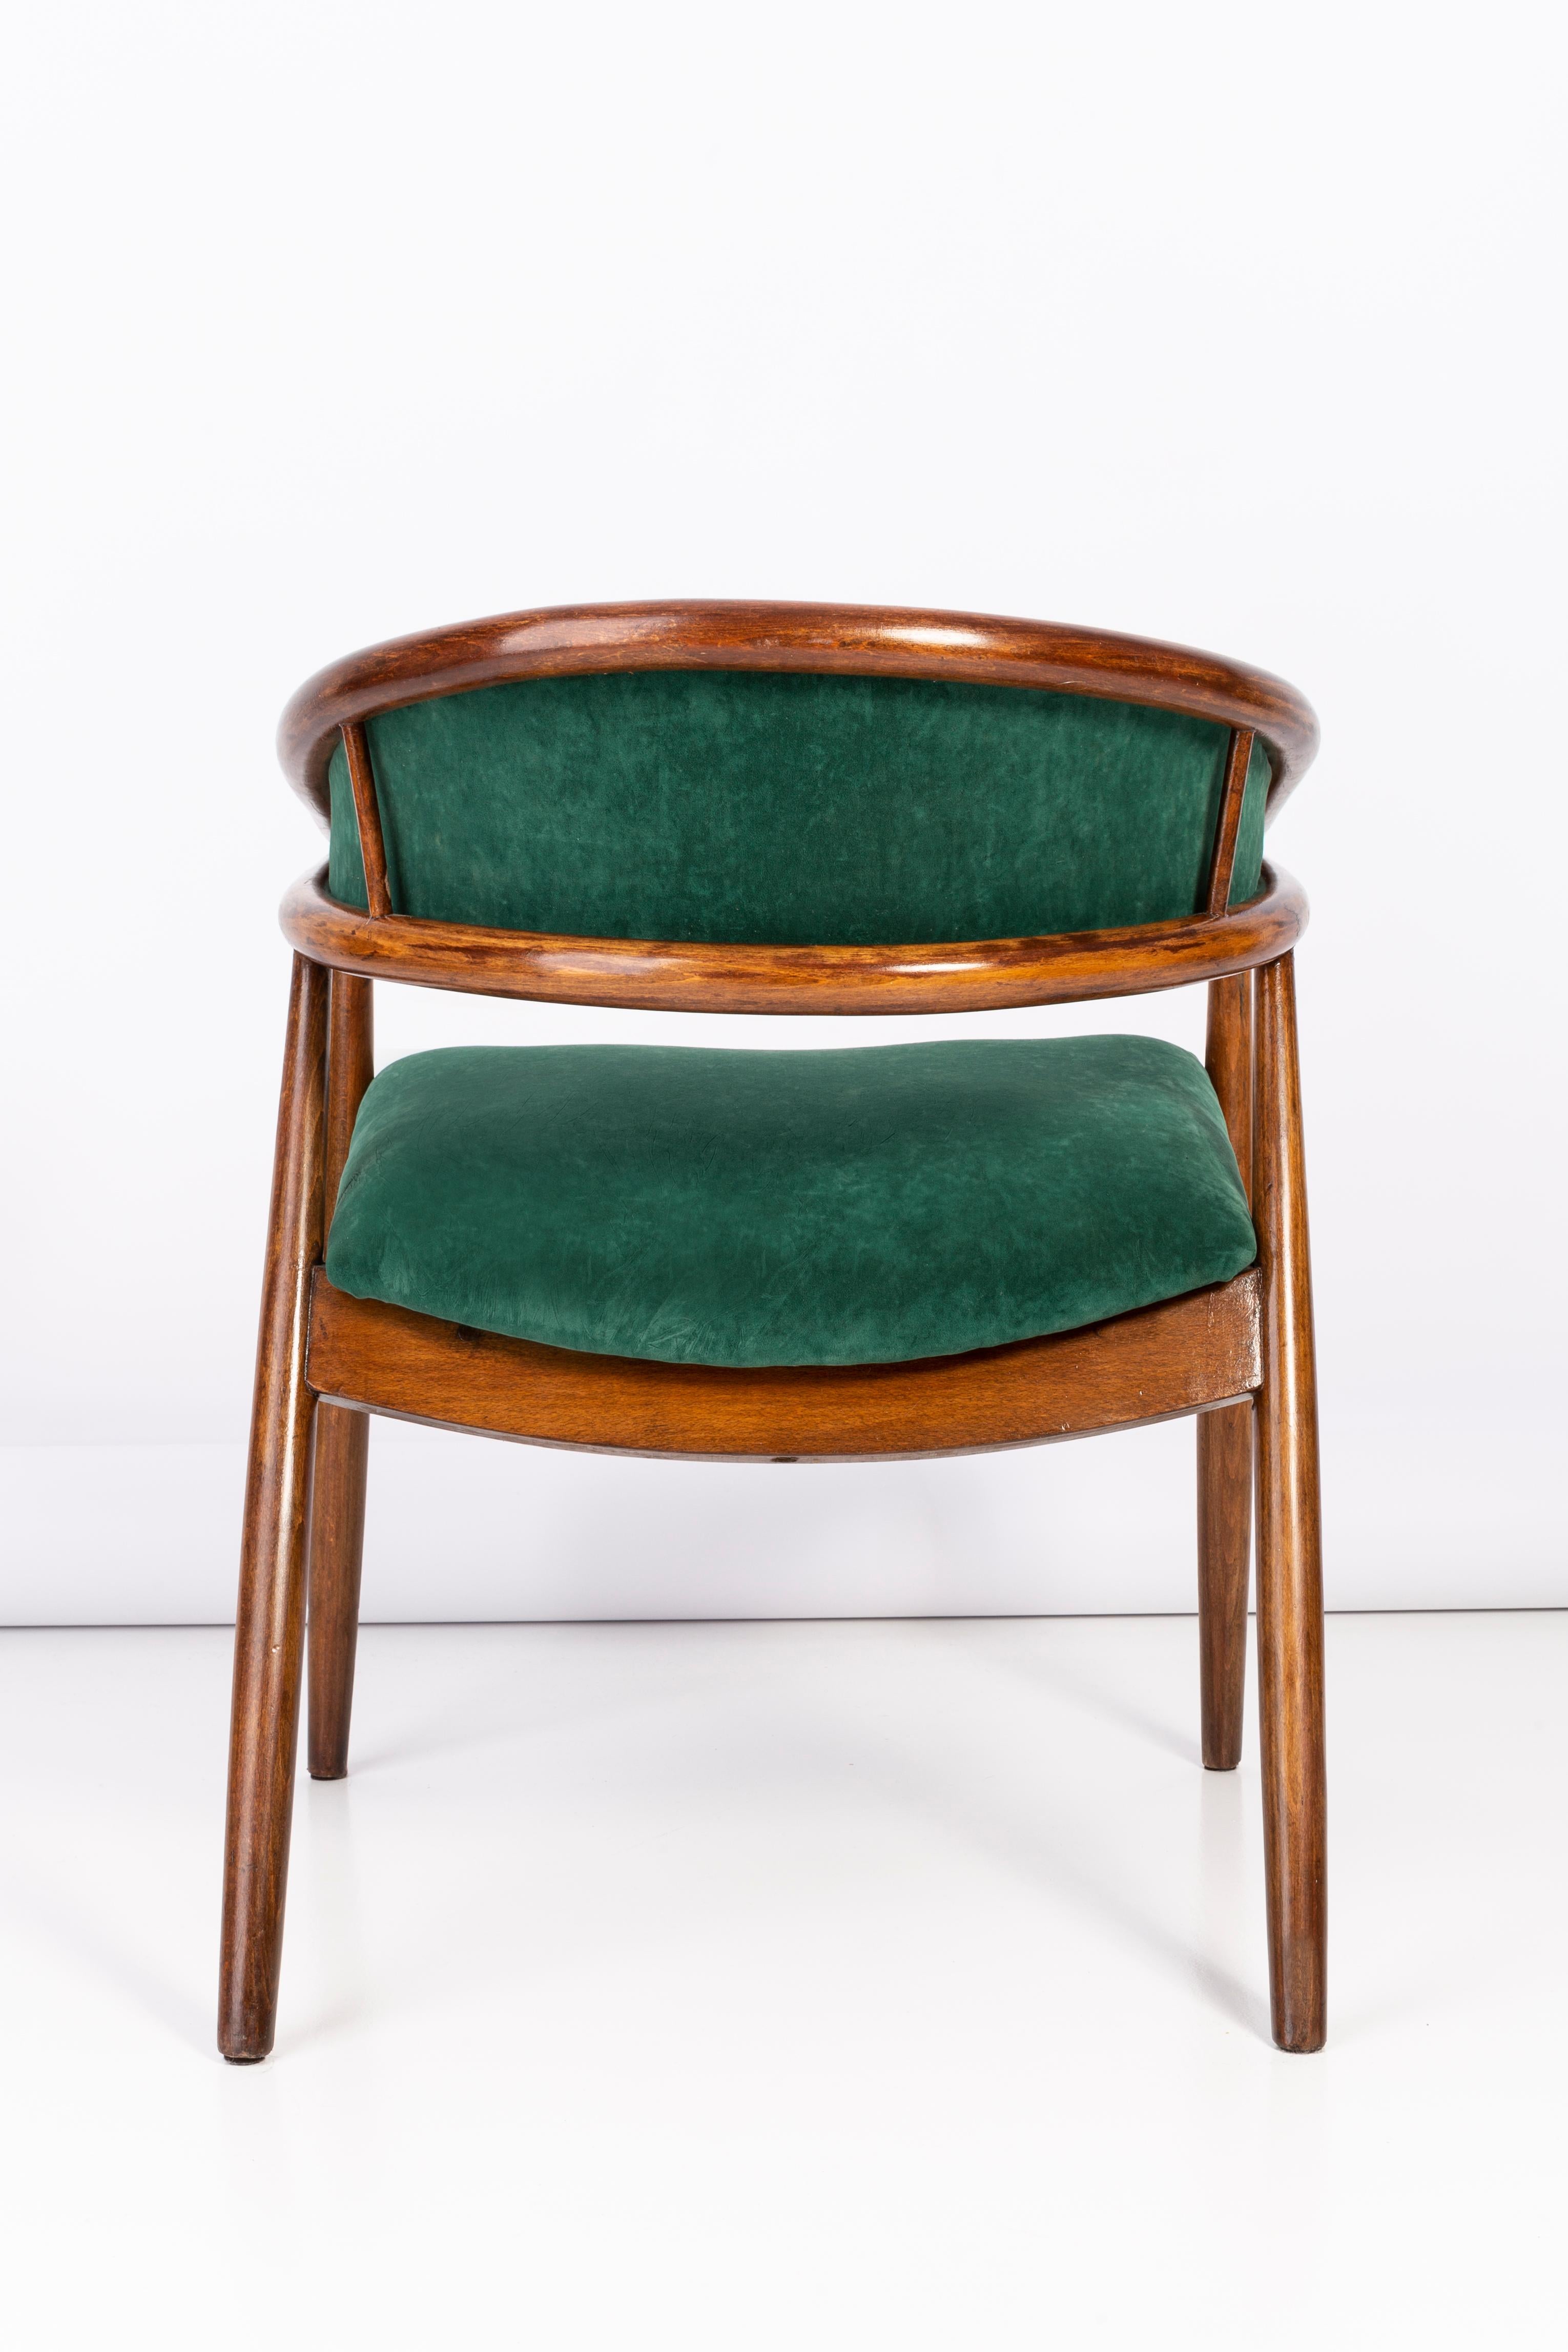 Set of Two James Mont Bent Beech Armchairs, Dark Green, B-3300 Type, 1960s For Sale 5